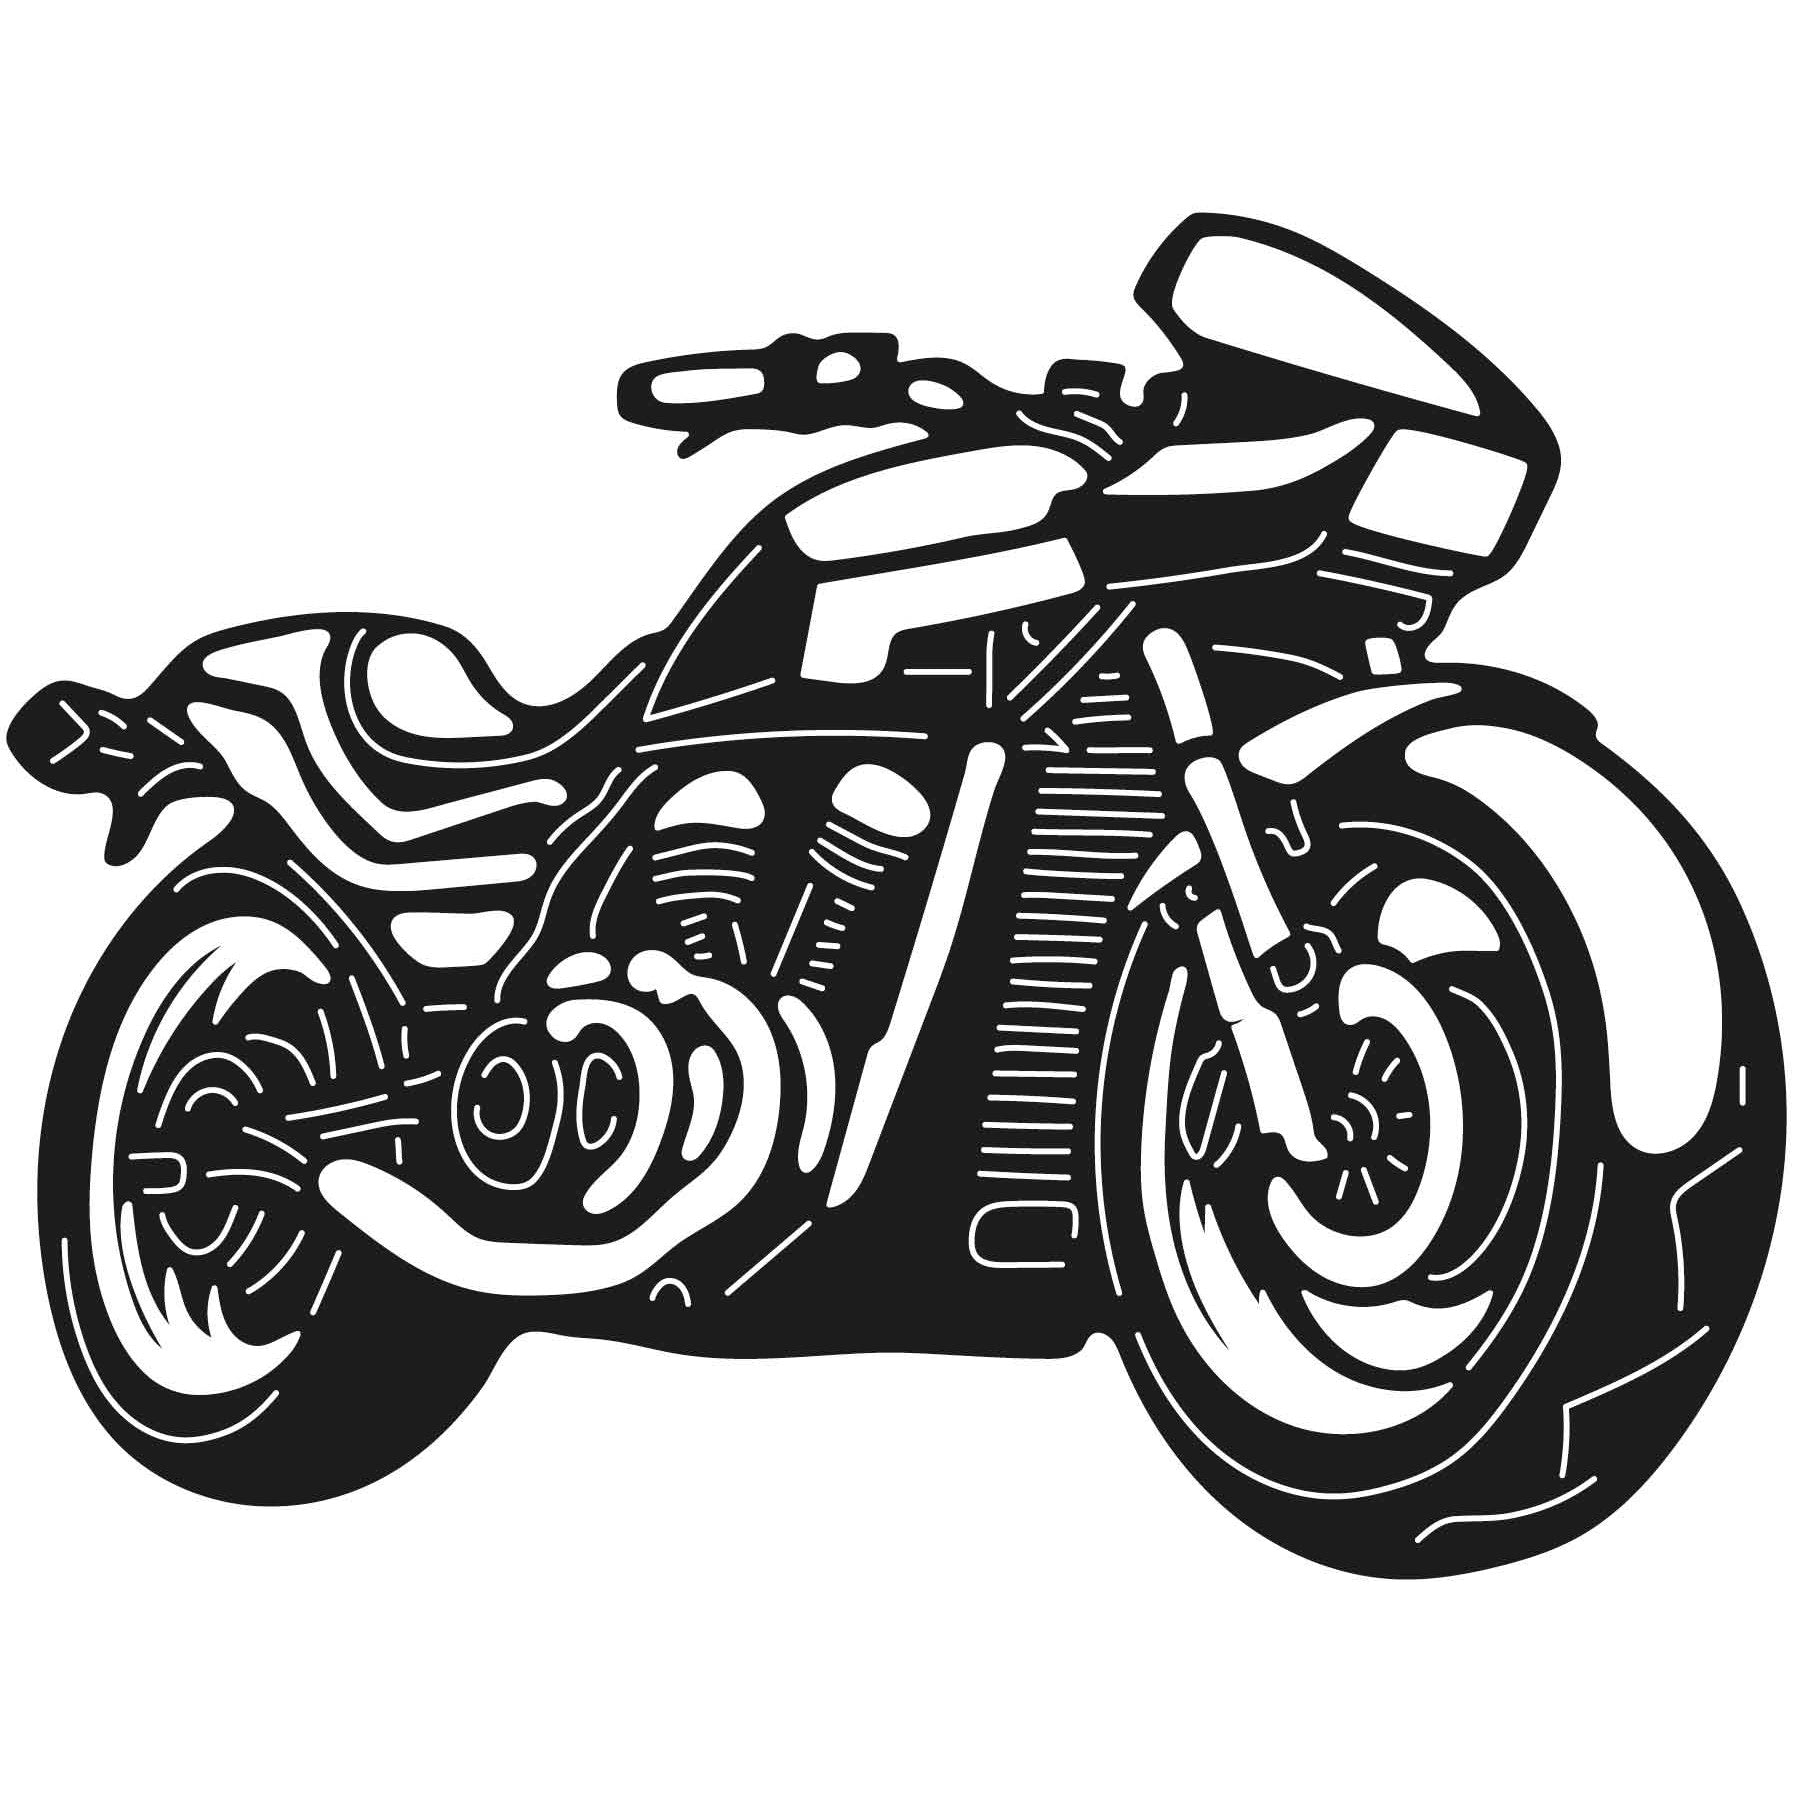 Motorcycles and Choppers 125 DXF File Cut Ready for CNC